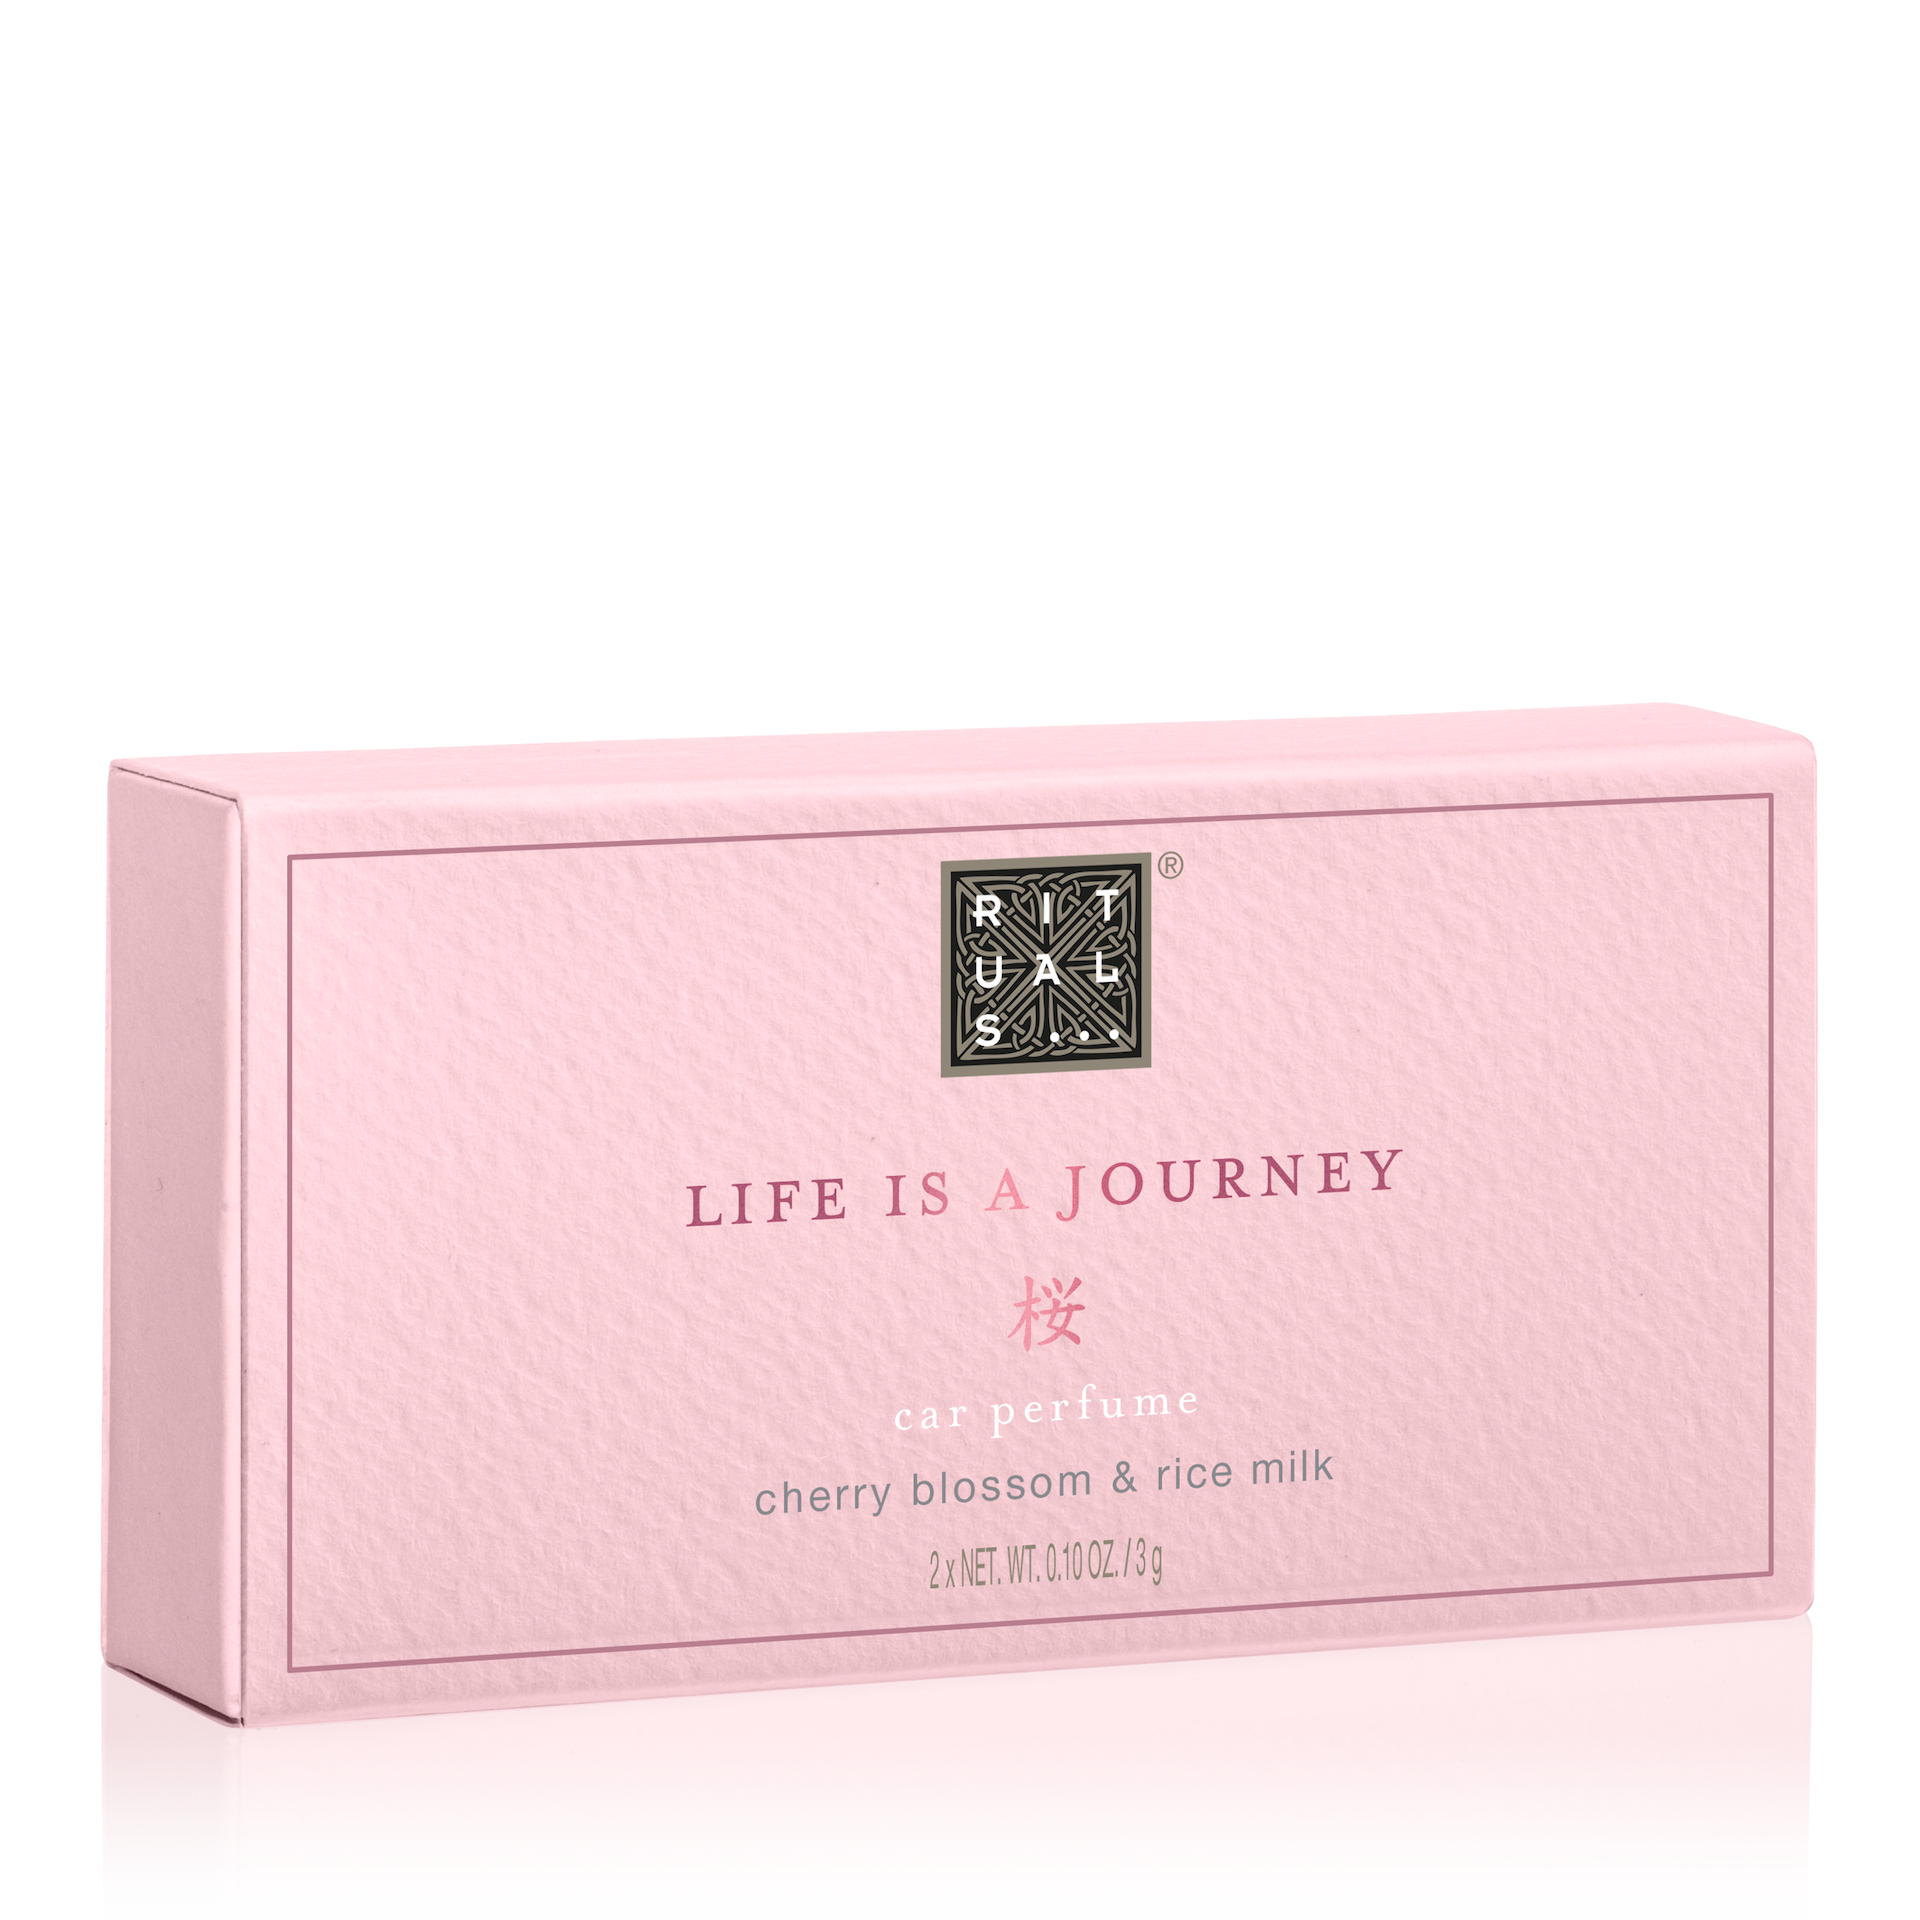 RITUALS Homme Car Perfume Life is a Journey